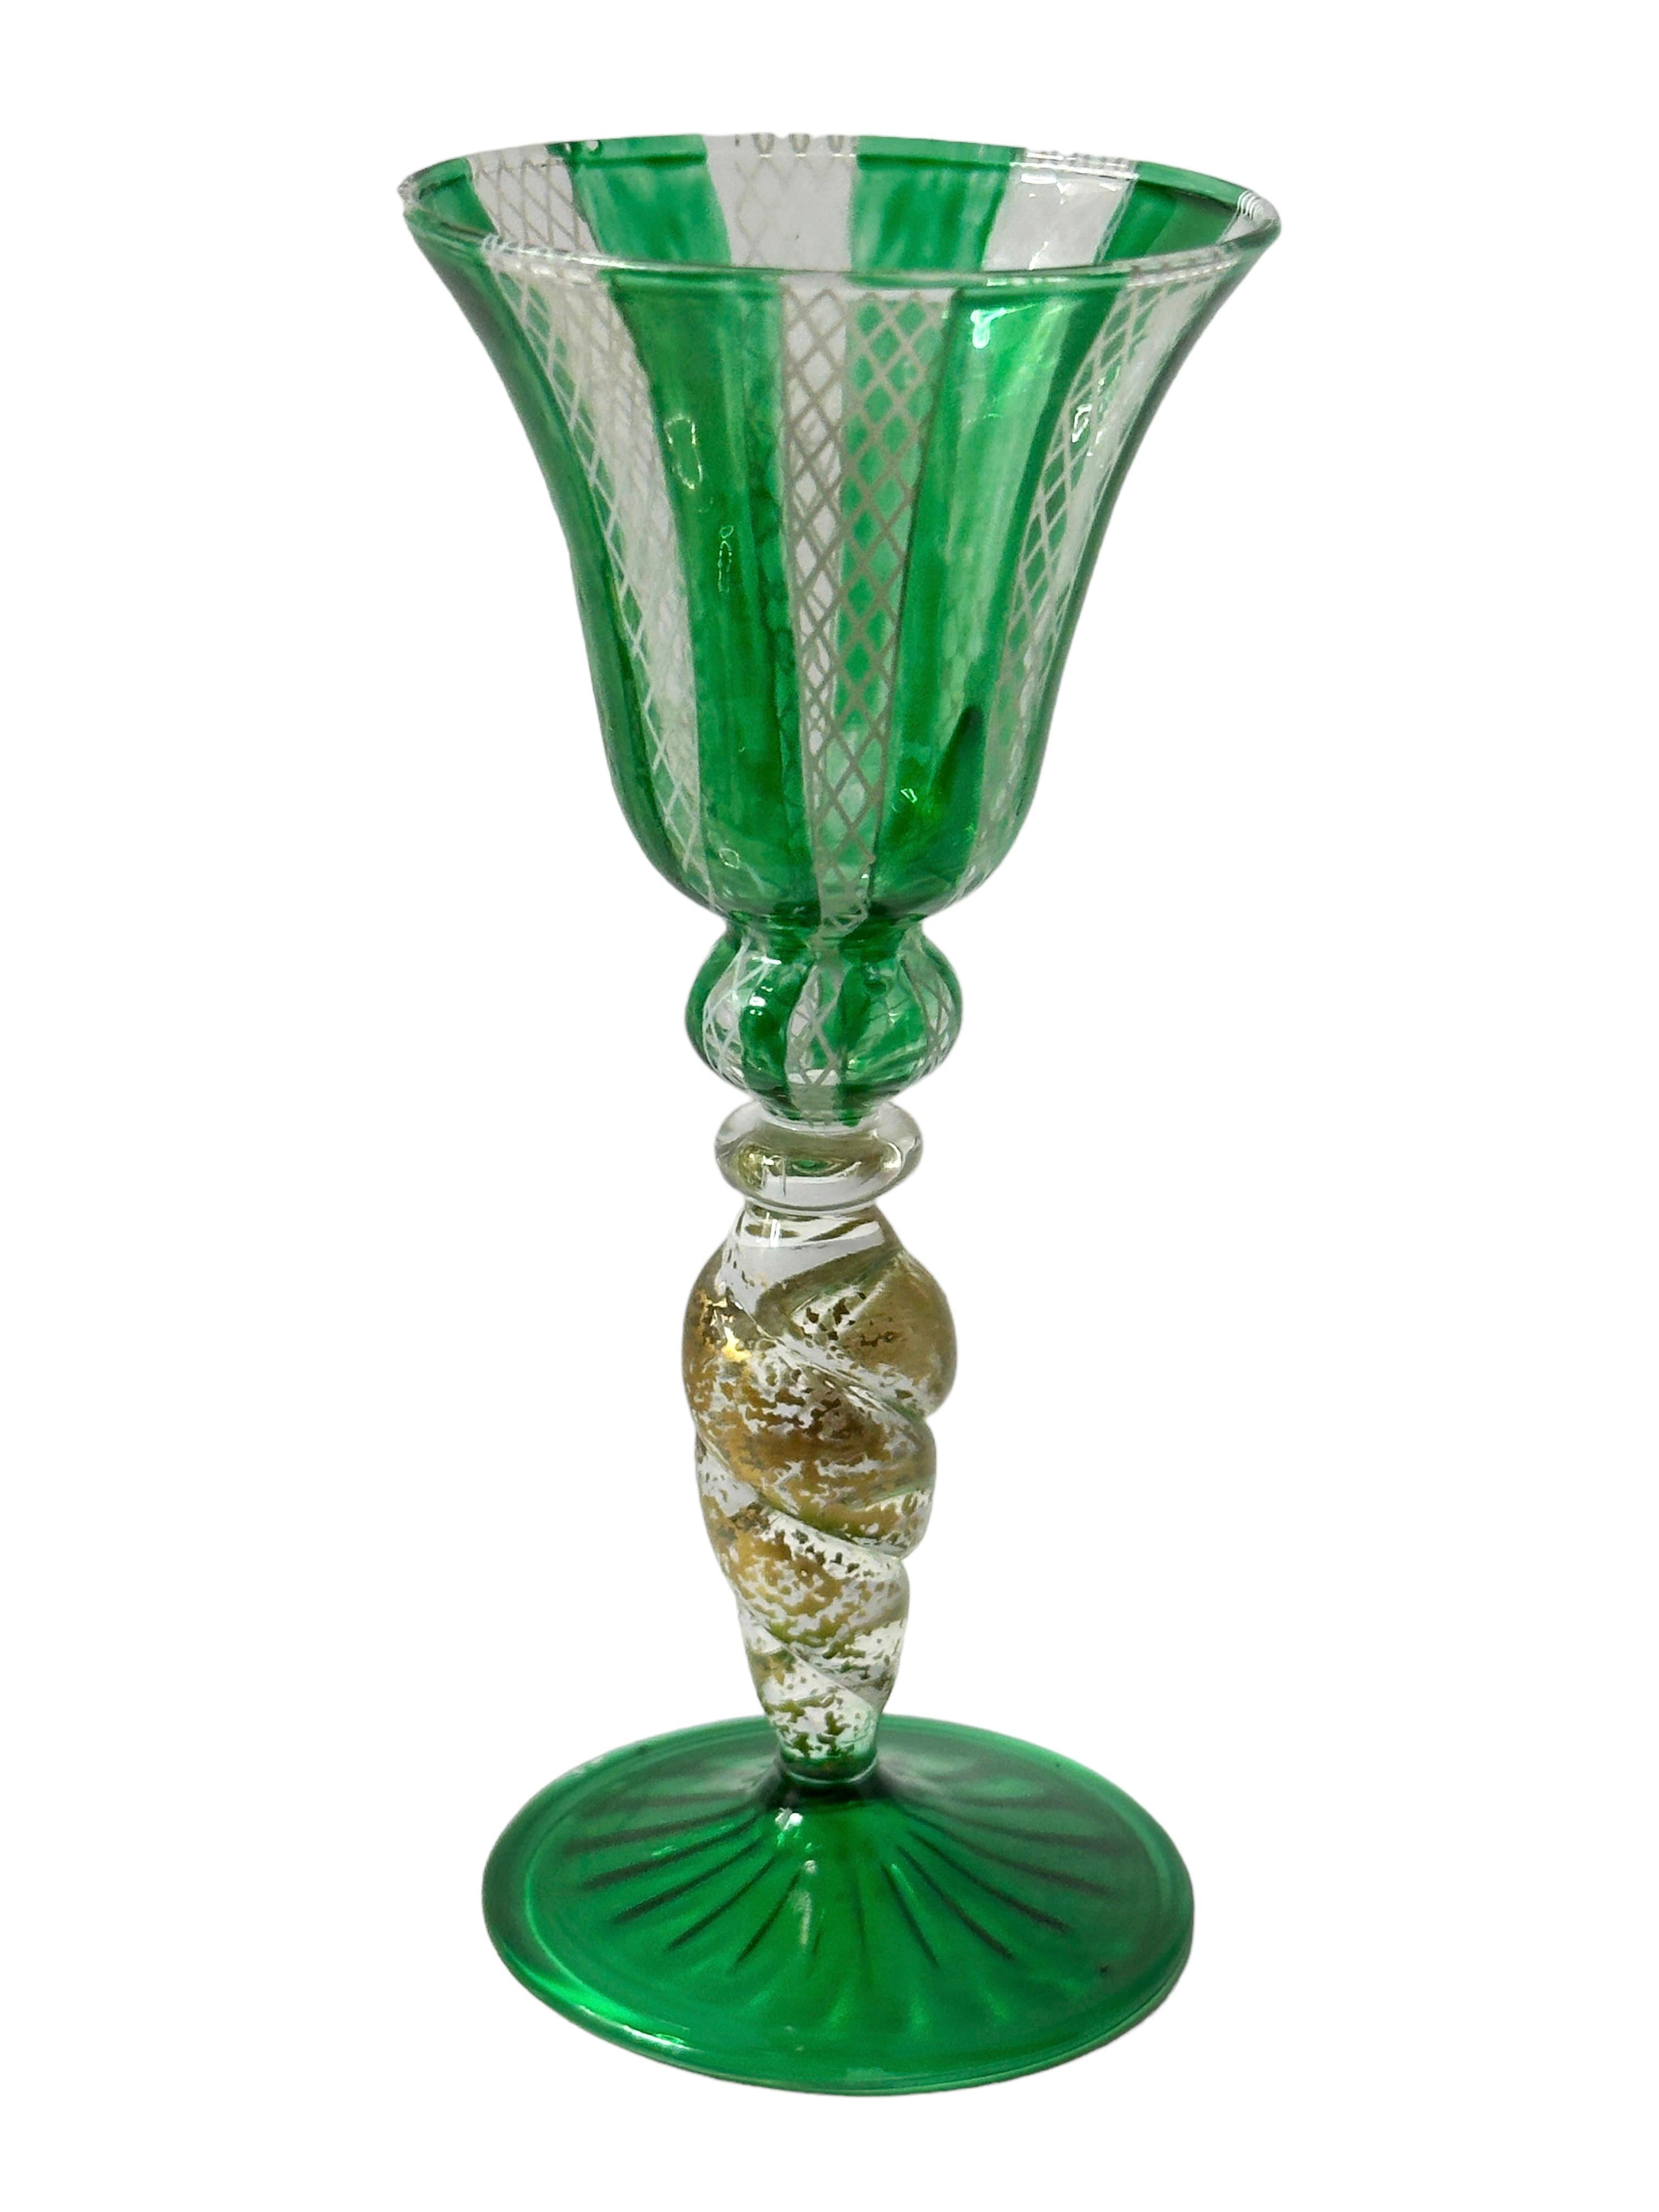 Green & Gold Stardust Salviati Murano Glass Liqueur Goblet, Vintage Italy  For Sale 1